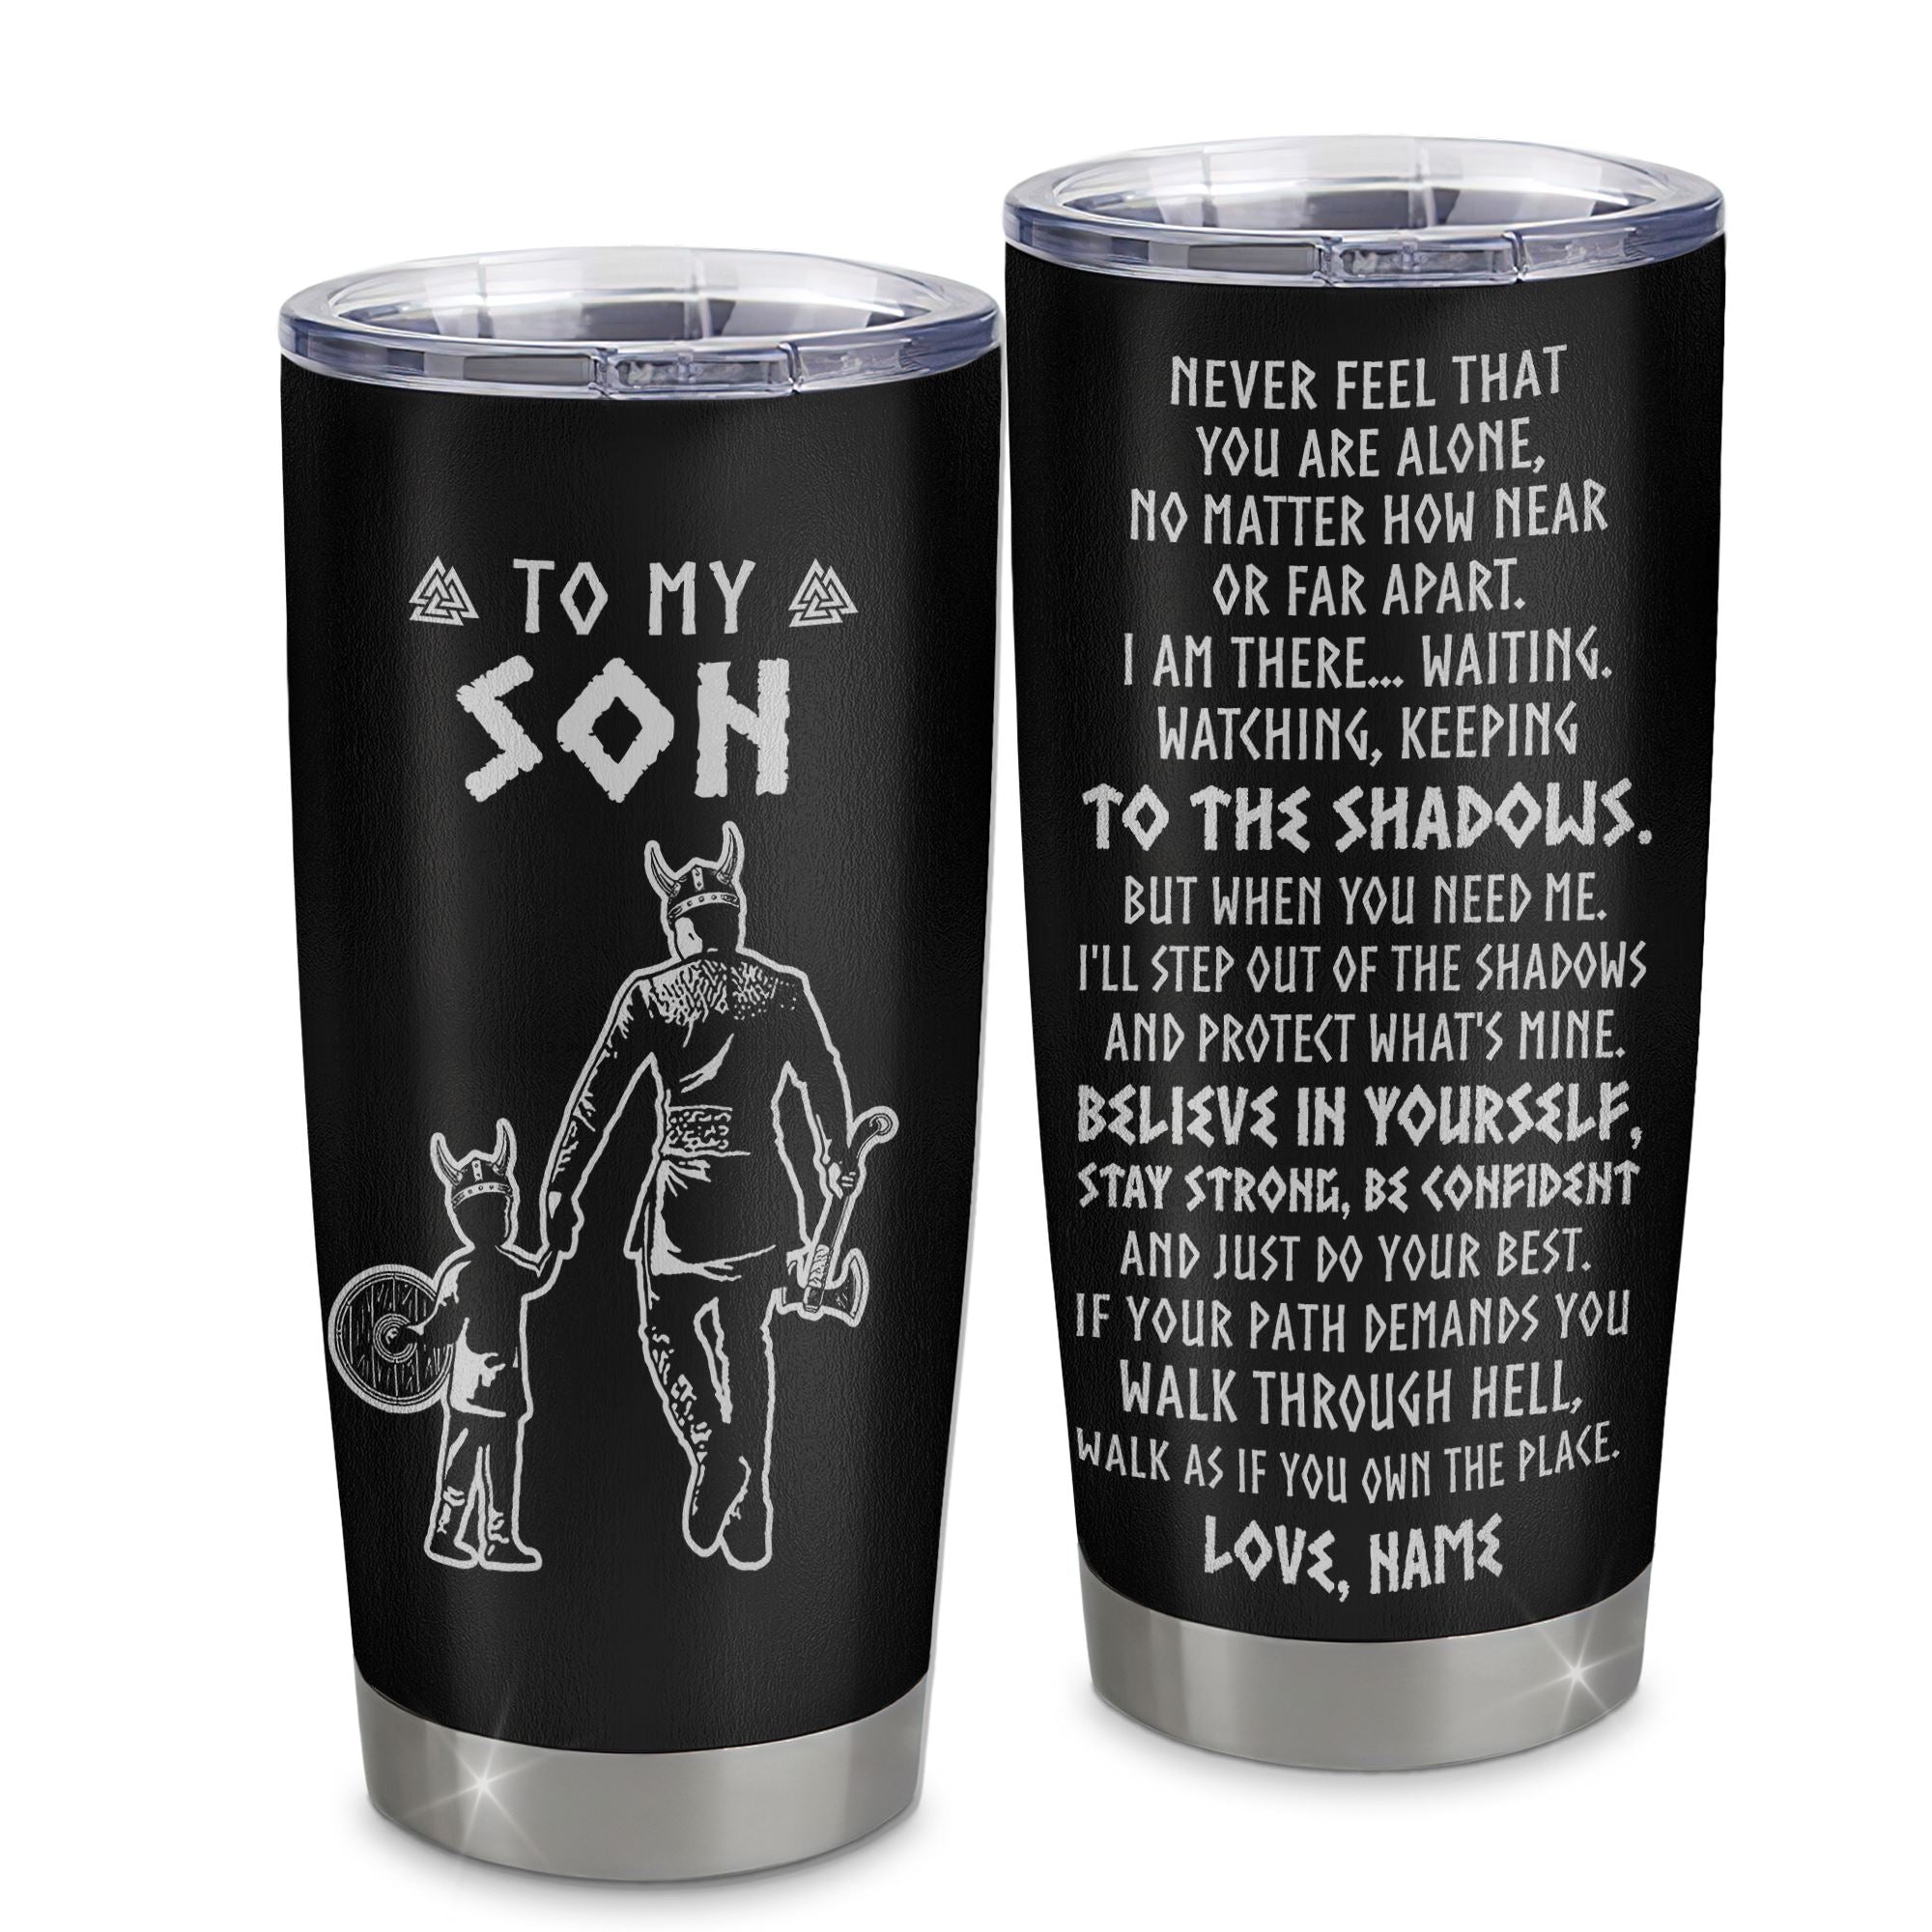 Personalized_To_My_Son_Tumbler_Viking_Stainless_Steel_Cup_Never_Feel_You_Are_Alone_Scandinavian_Runes_Viking_Son_Birthday_Christmas_Travel_Mug_Tumbler_mockup_1.jpg